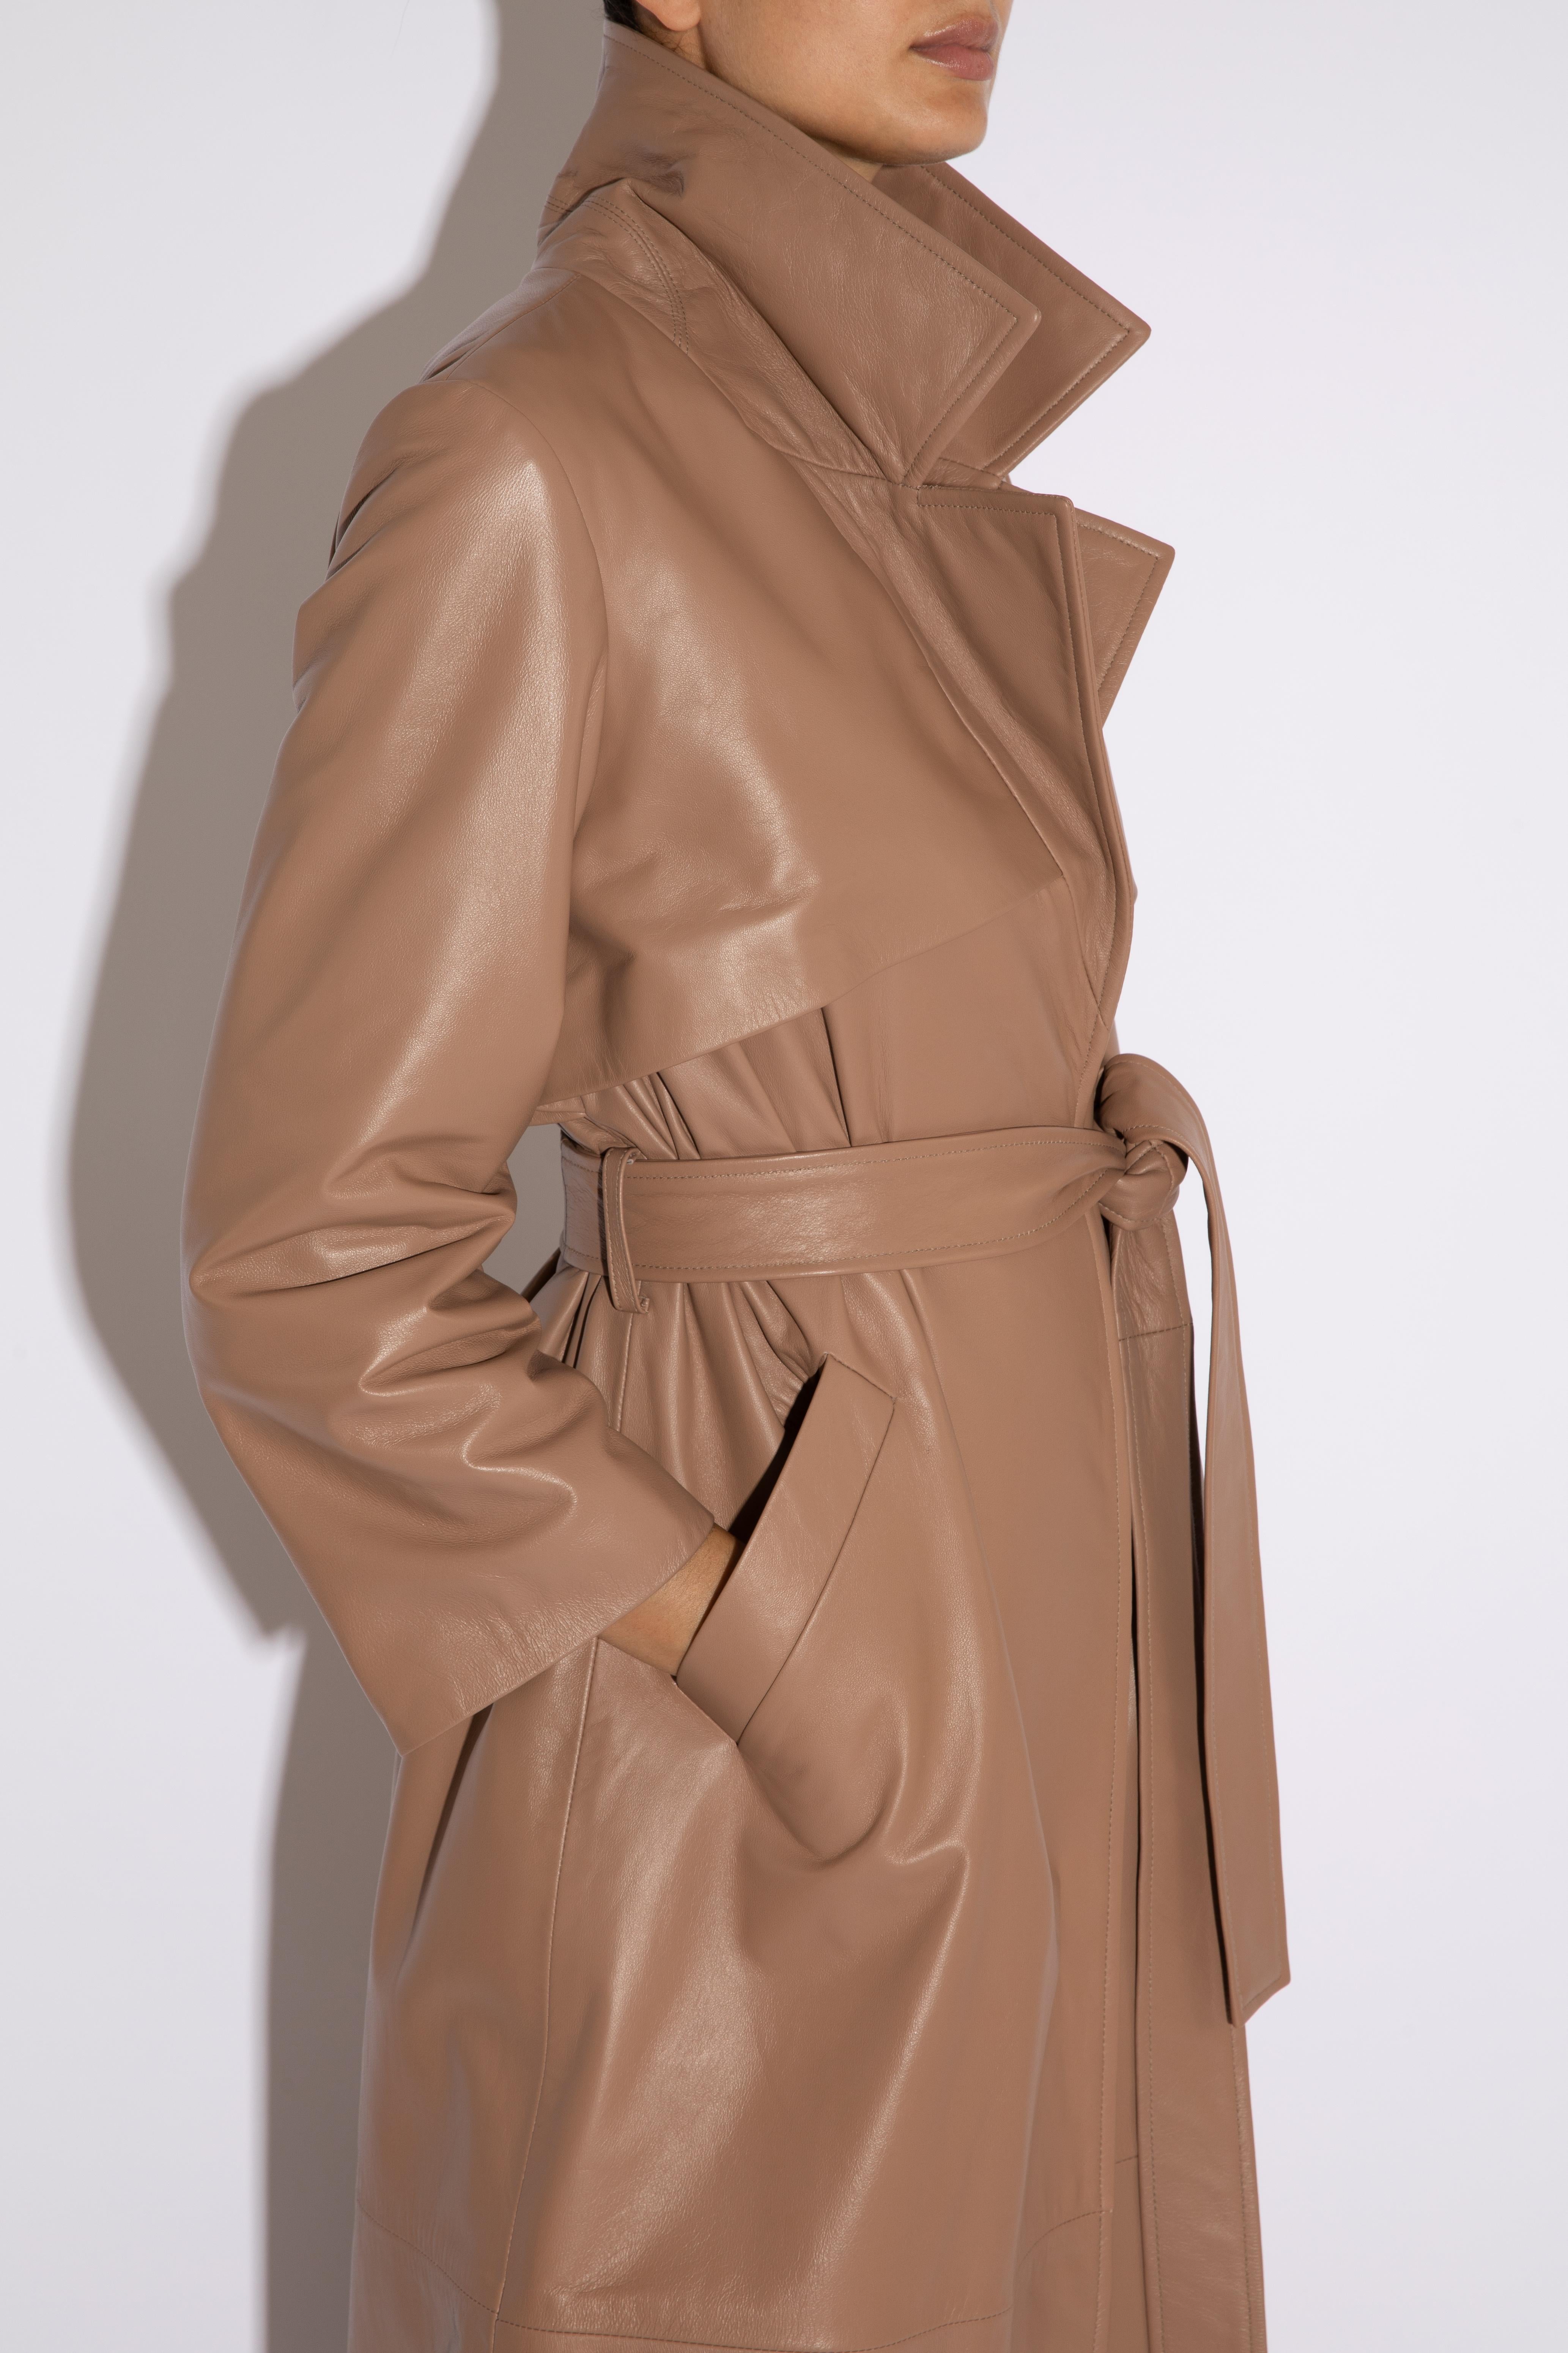 Women's Verheyen London Leather Trench Coat in Taupe Brown - Size uk 12 For Sale